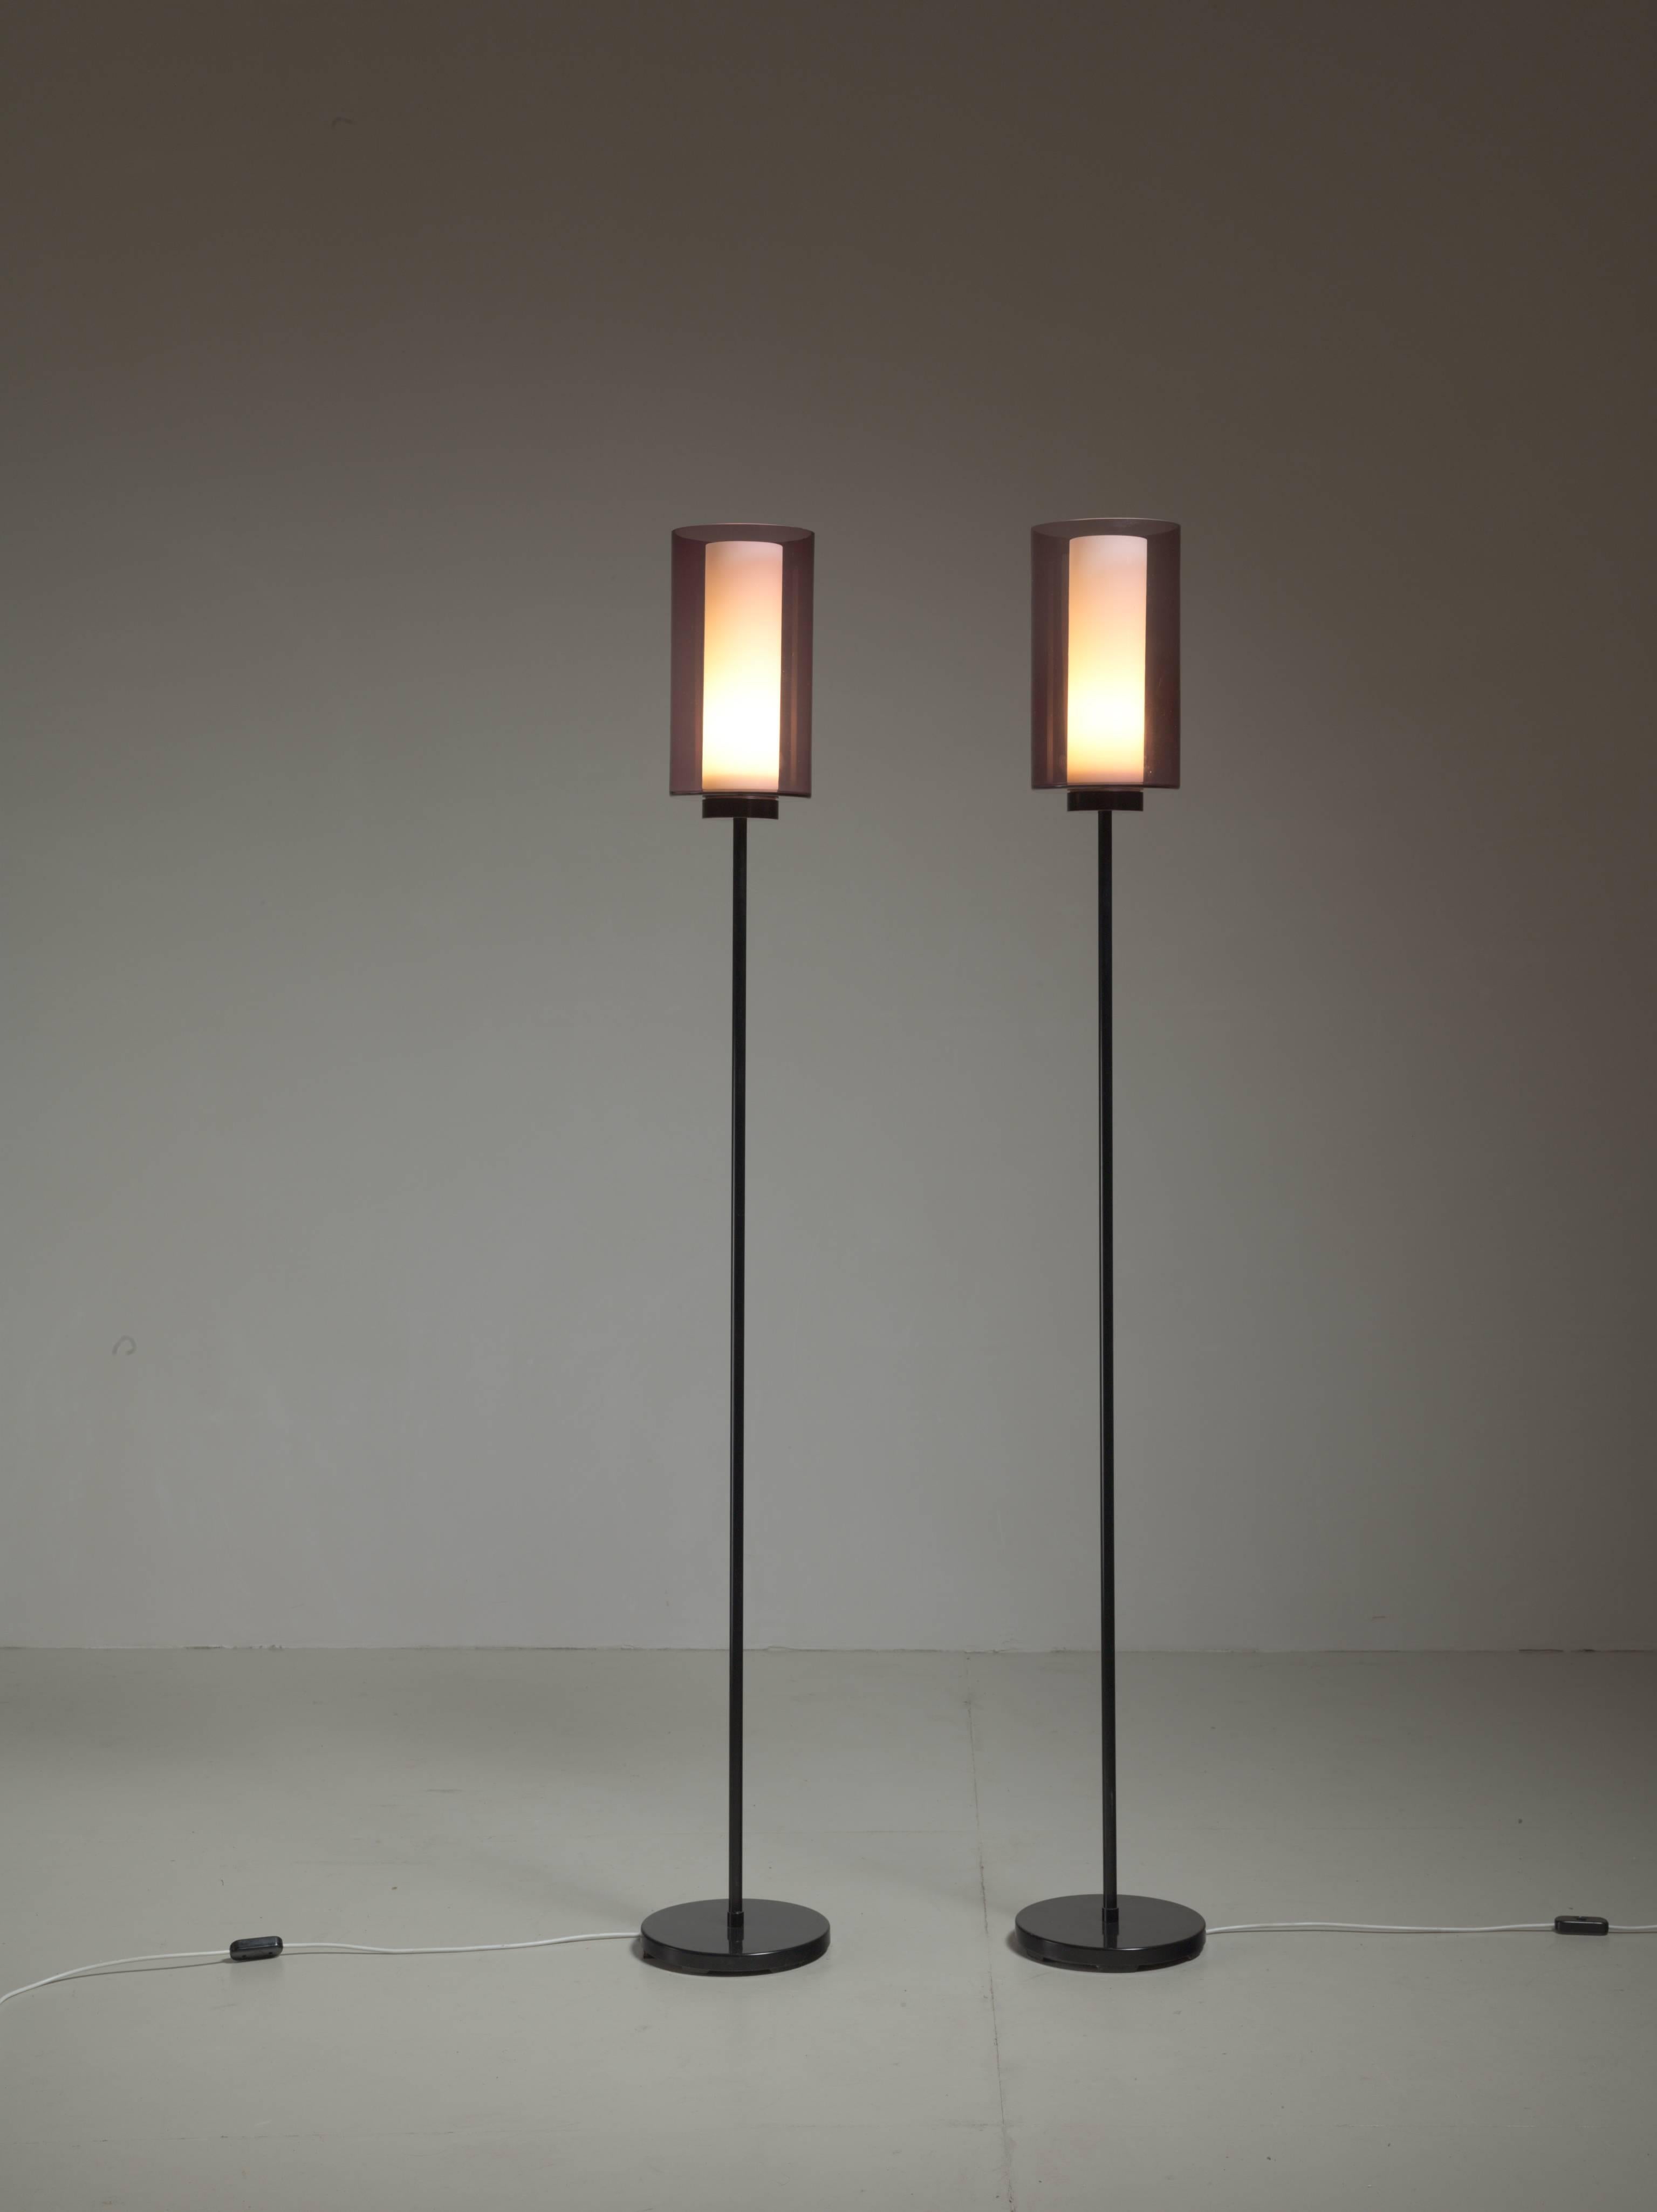 A unique pair of floor lamps with a red glass shade by Tapio Wirkkala for Iittala.
The shades are original old stock from the 1950s, with labels and in a perfect condition. Measures: The shades are 20 cm (8 inch) high and have a diameter of 18.5 cm